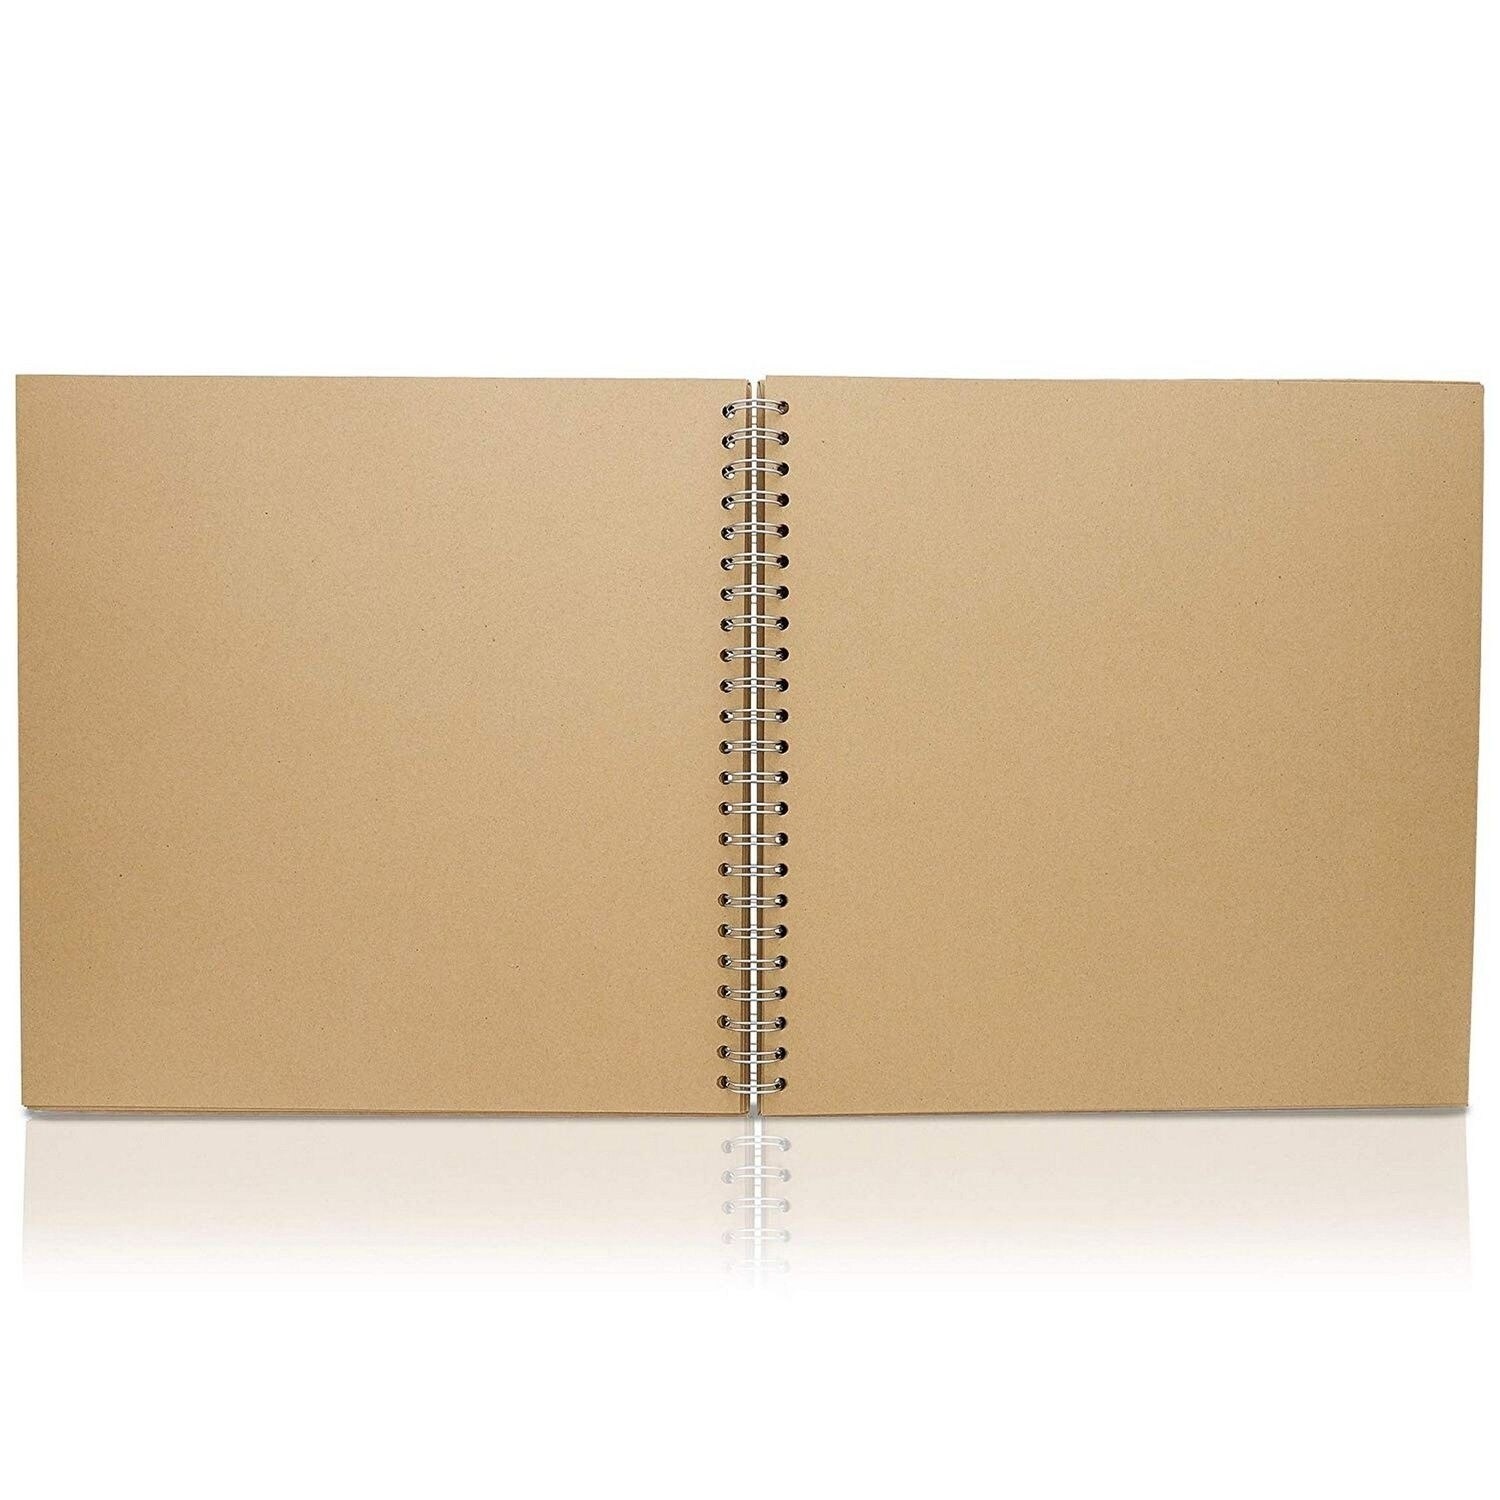 12x12 Scrapbook Album Hardcover (Blank), Kraft Paper Material Spiral Bound  Sketchbook for Drawing, Writing, Arts and Crafts Projects, Home, Office